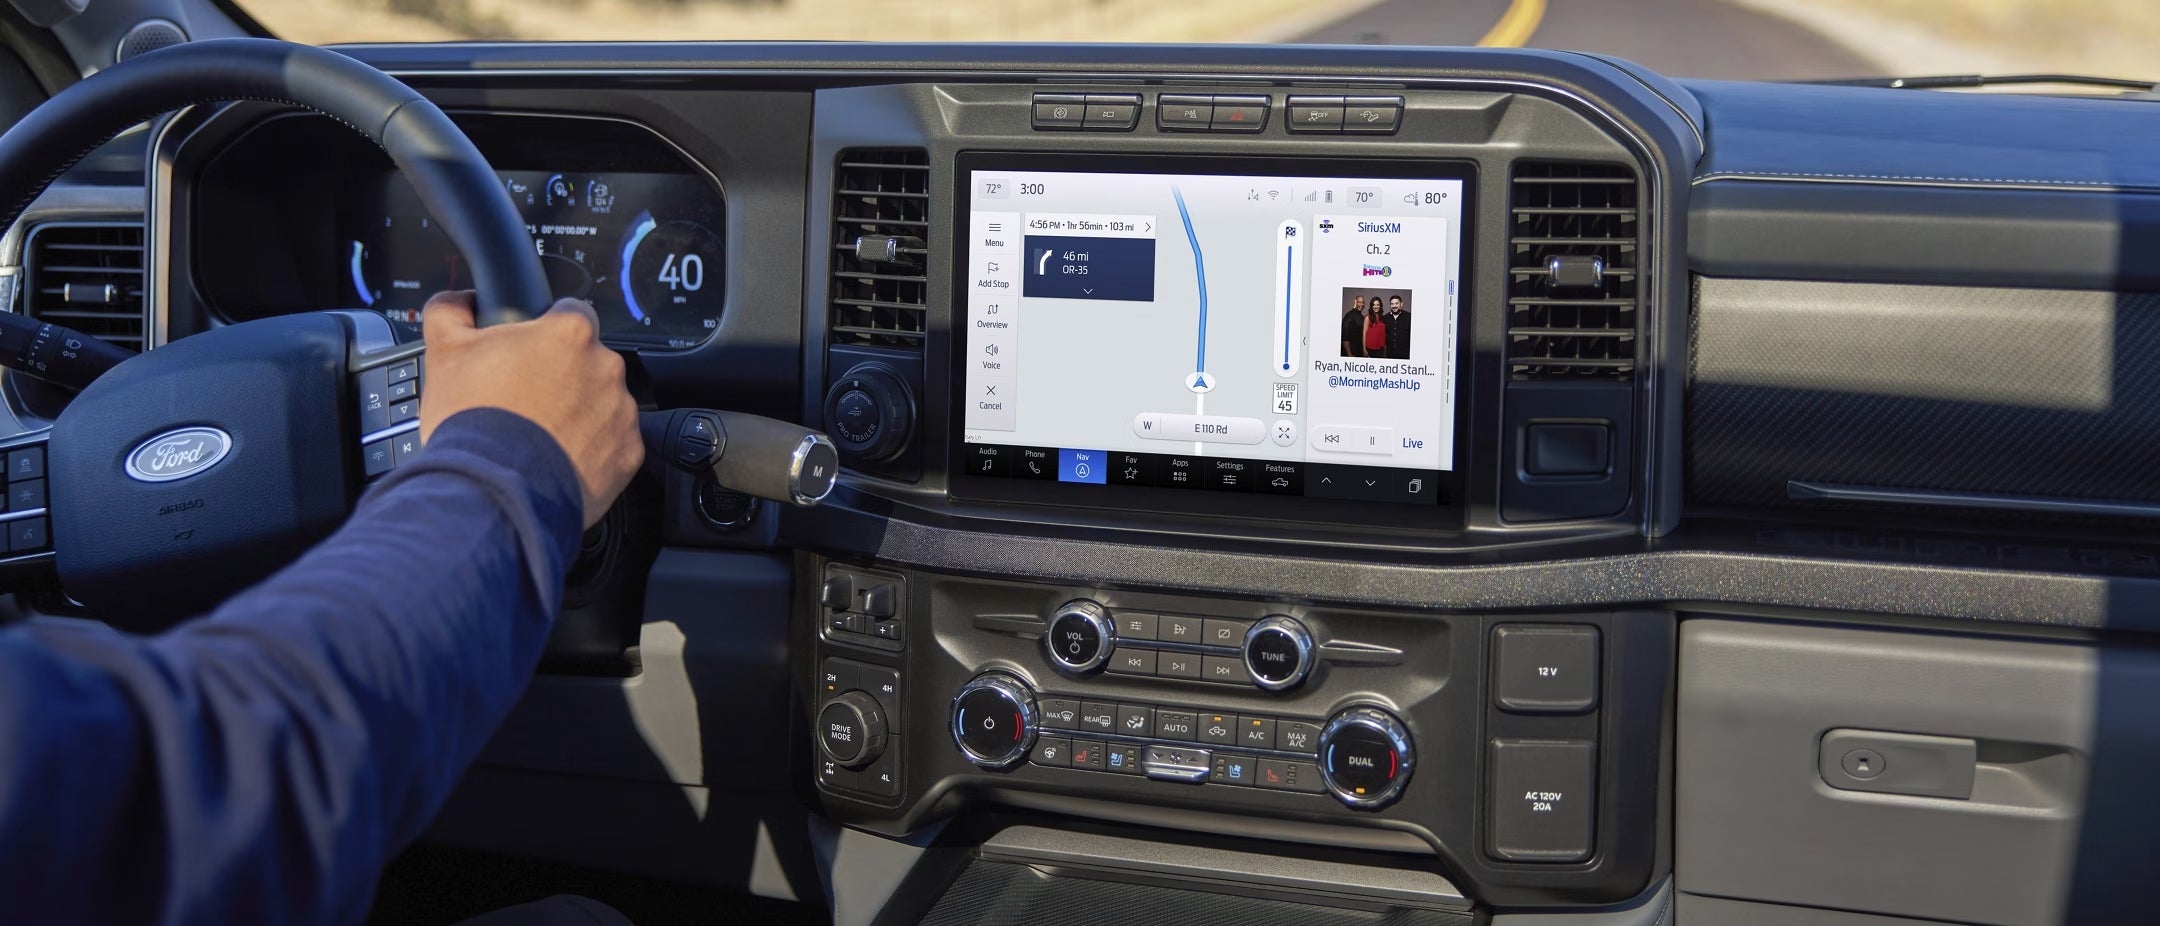 Ford Super Duty is Packed with Features at Power Ford in Albuquerque, New Mexico